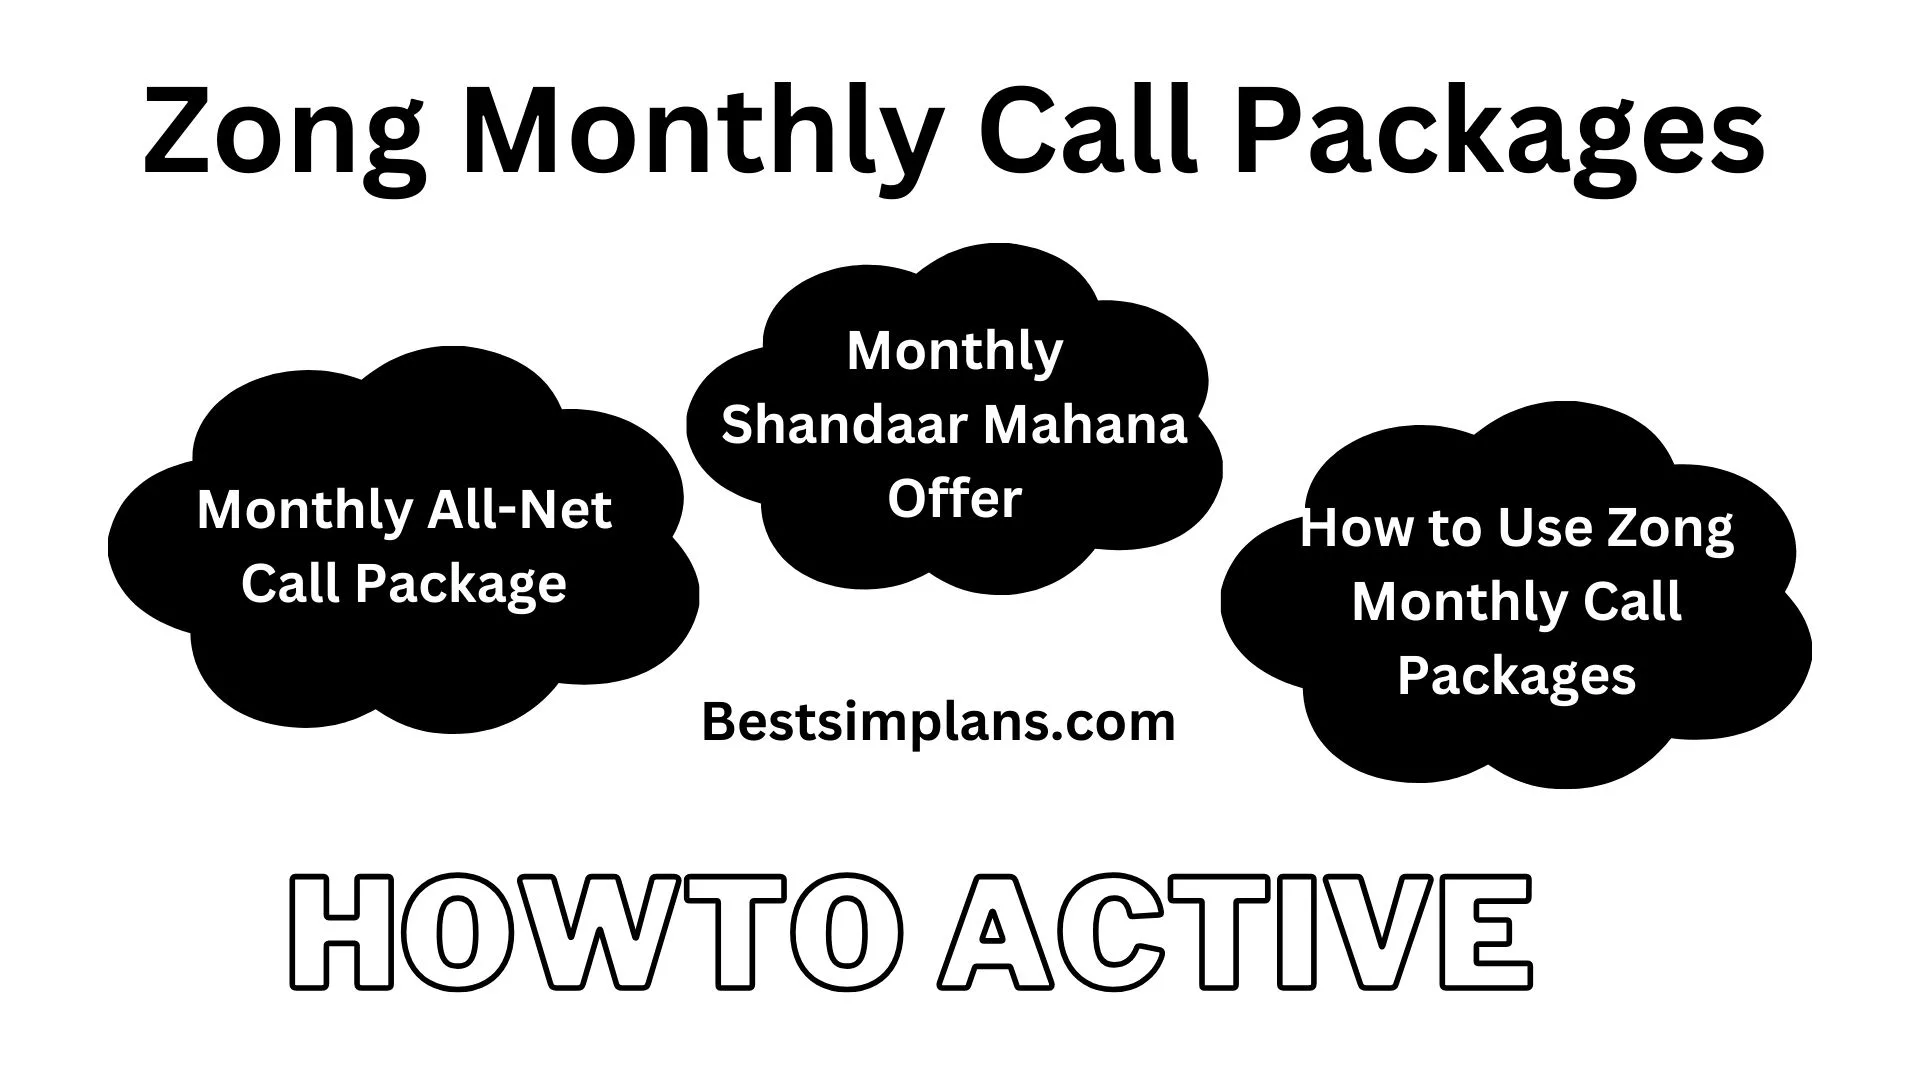 Non-Stop Zong Monthly Call Packages 30 Days